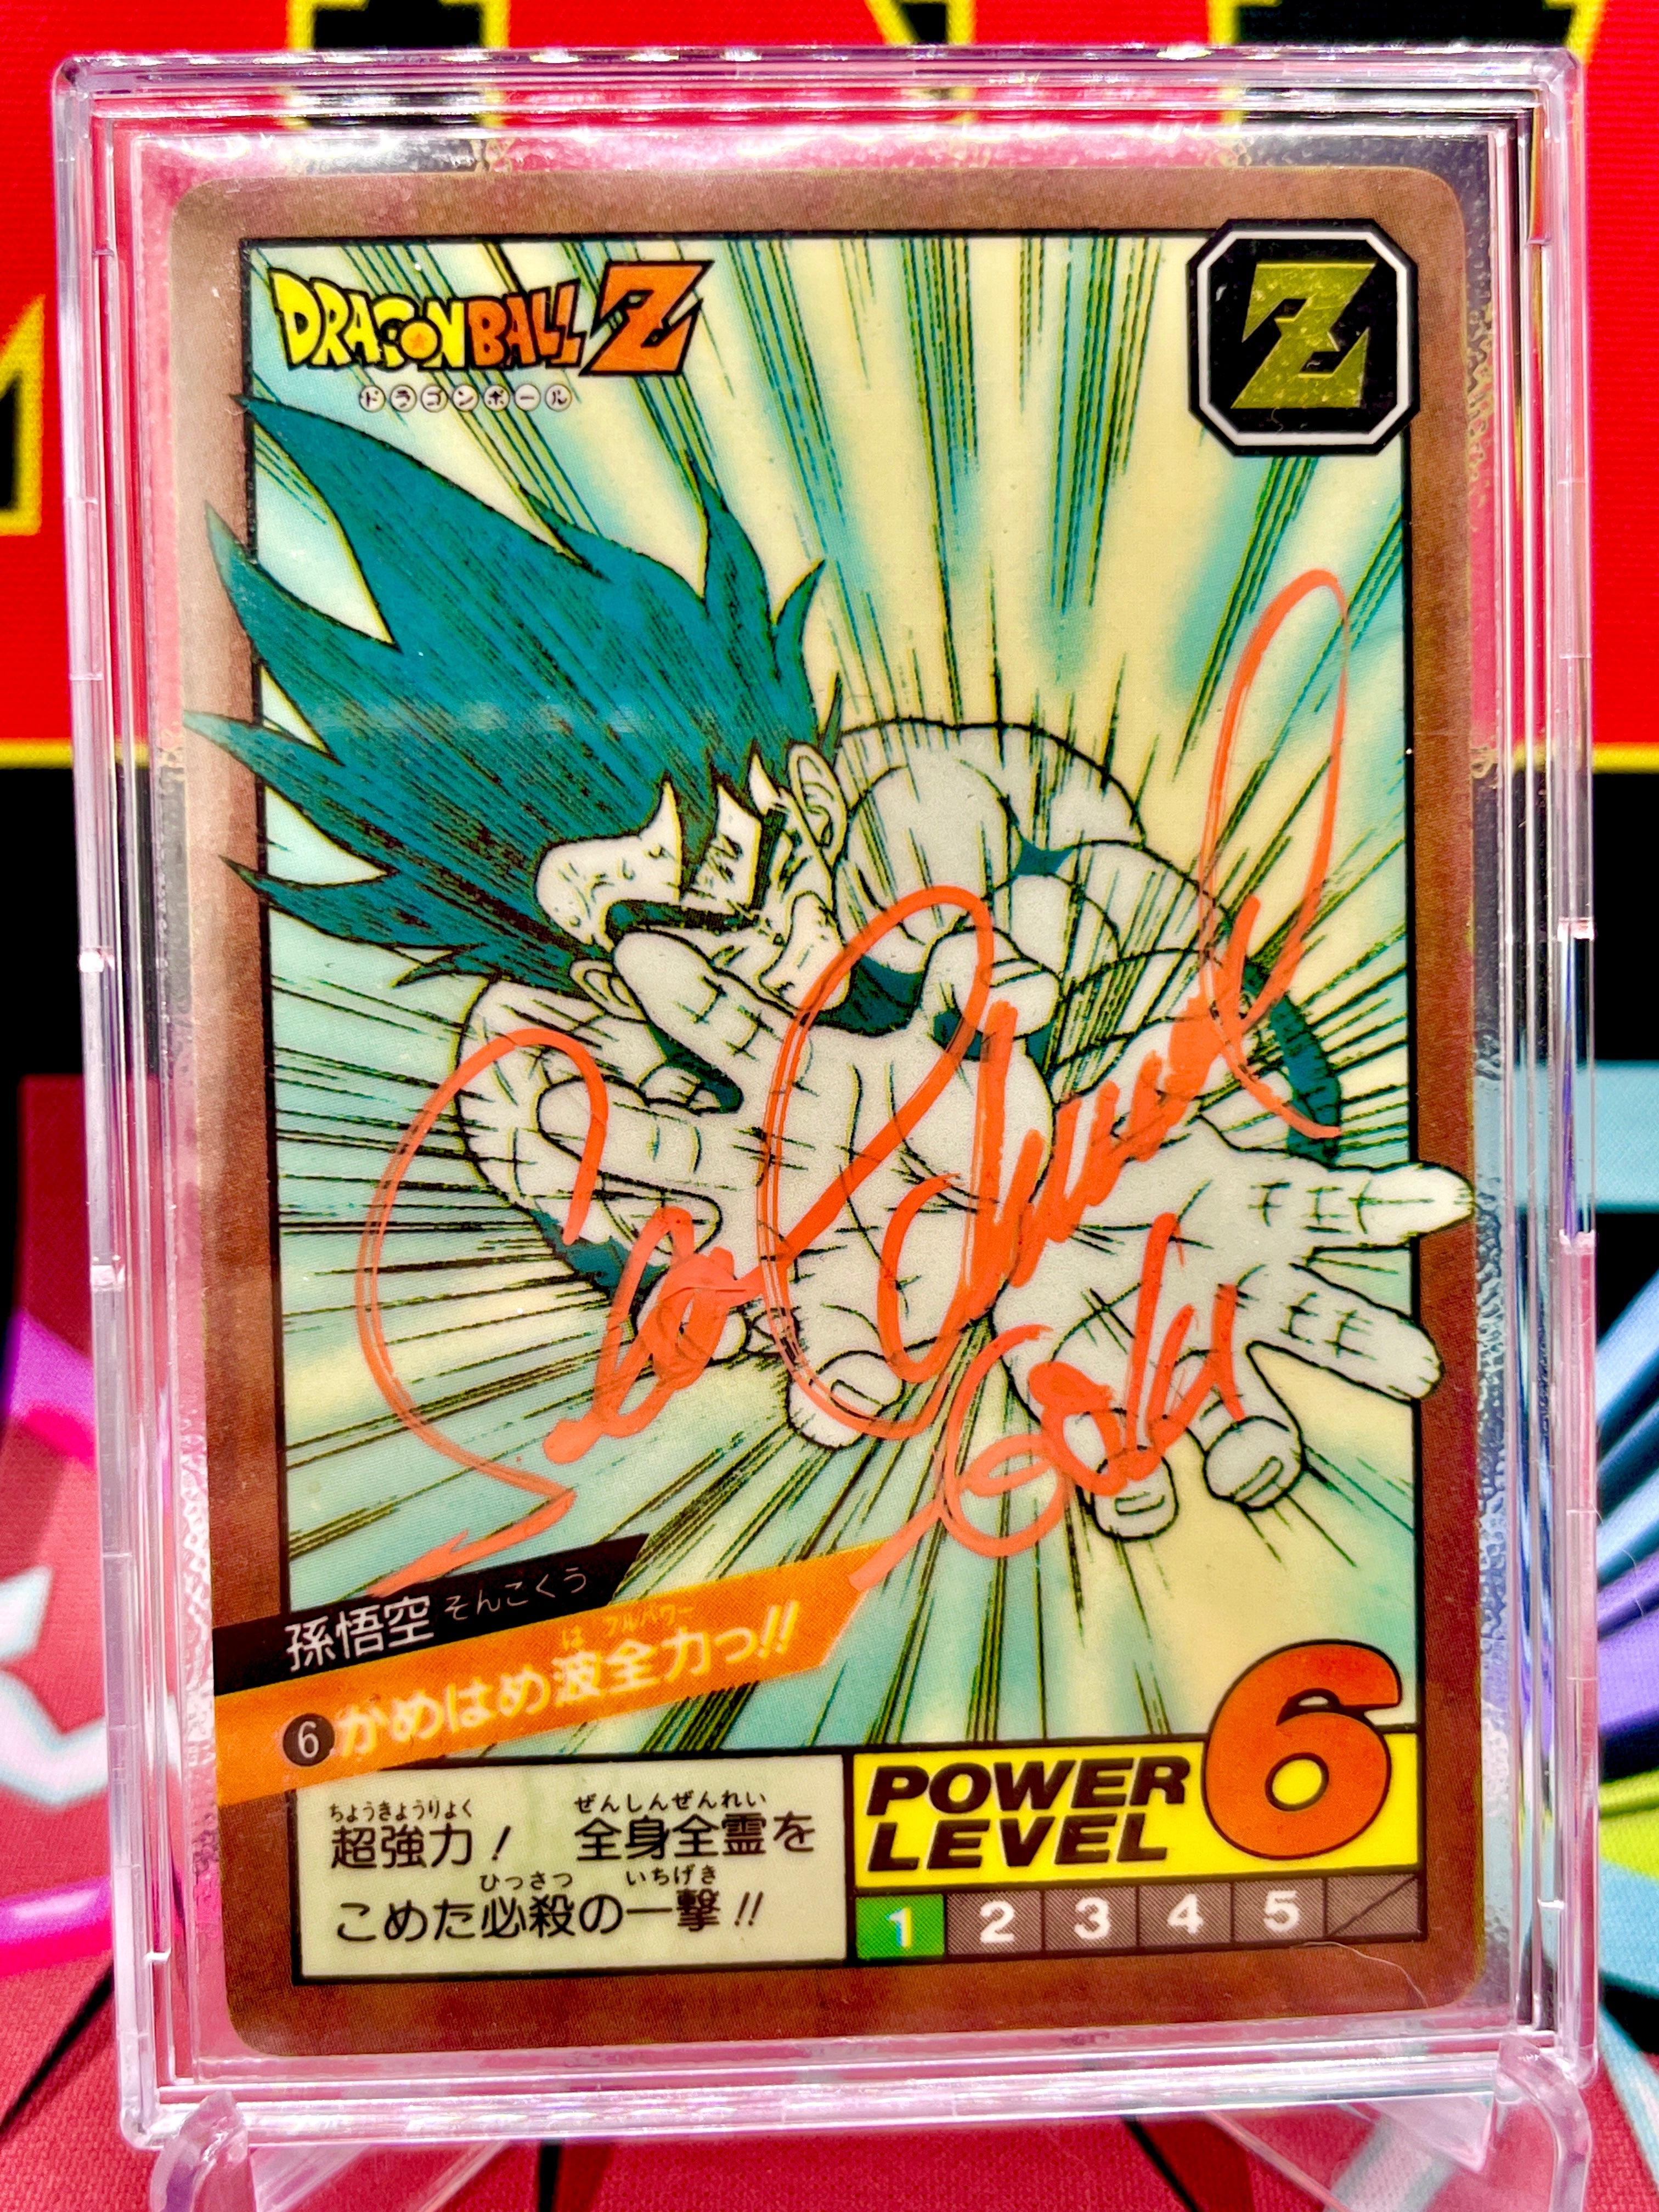 #6 Goku EXTREMELY RARE Unpeeled Super Battle Carddass Series 1 (1991) Autographed by Sean Schemmel